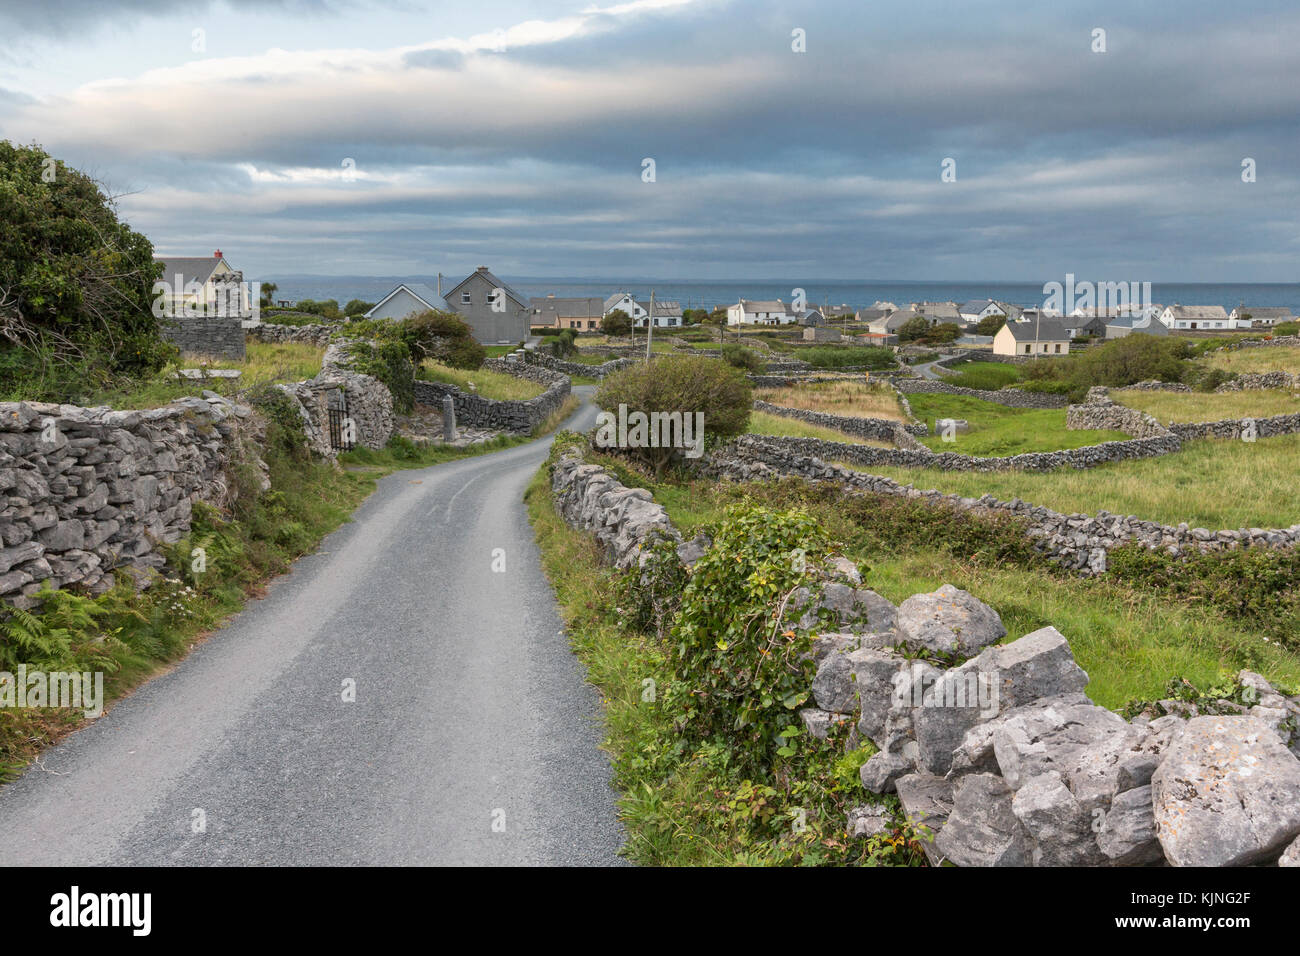 Scenic Landscape of Inis Oírr (Inisheer), one of three islands in the Aran Islands, County Galway, Ireland. Stock Photo